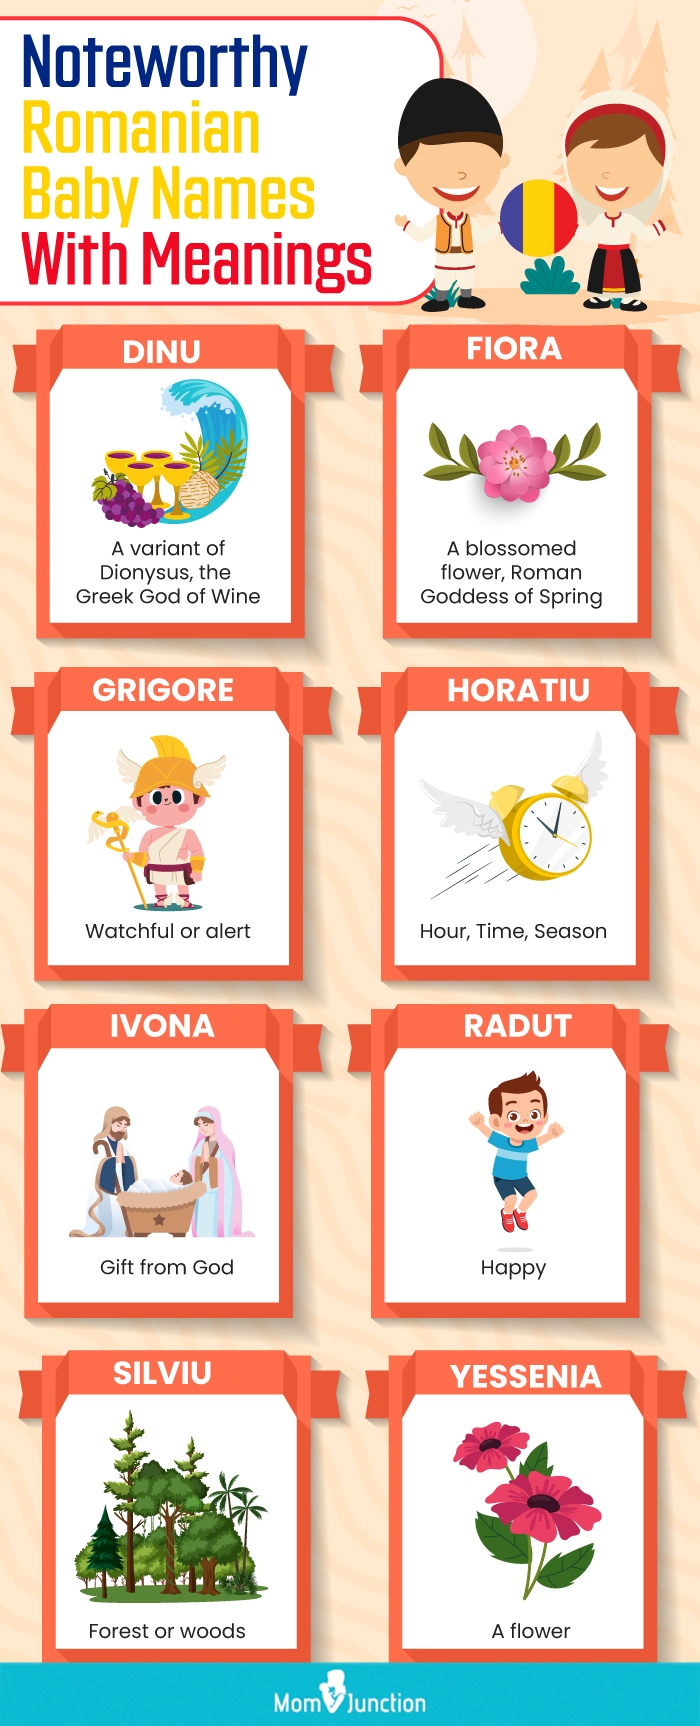 noteworthy romanian baby names with meanings (infographic)